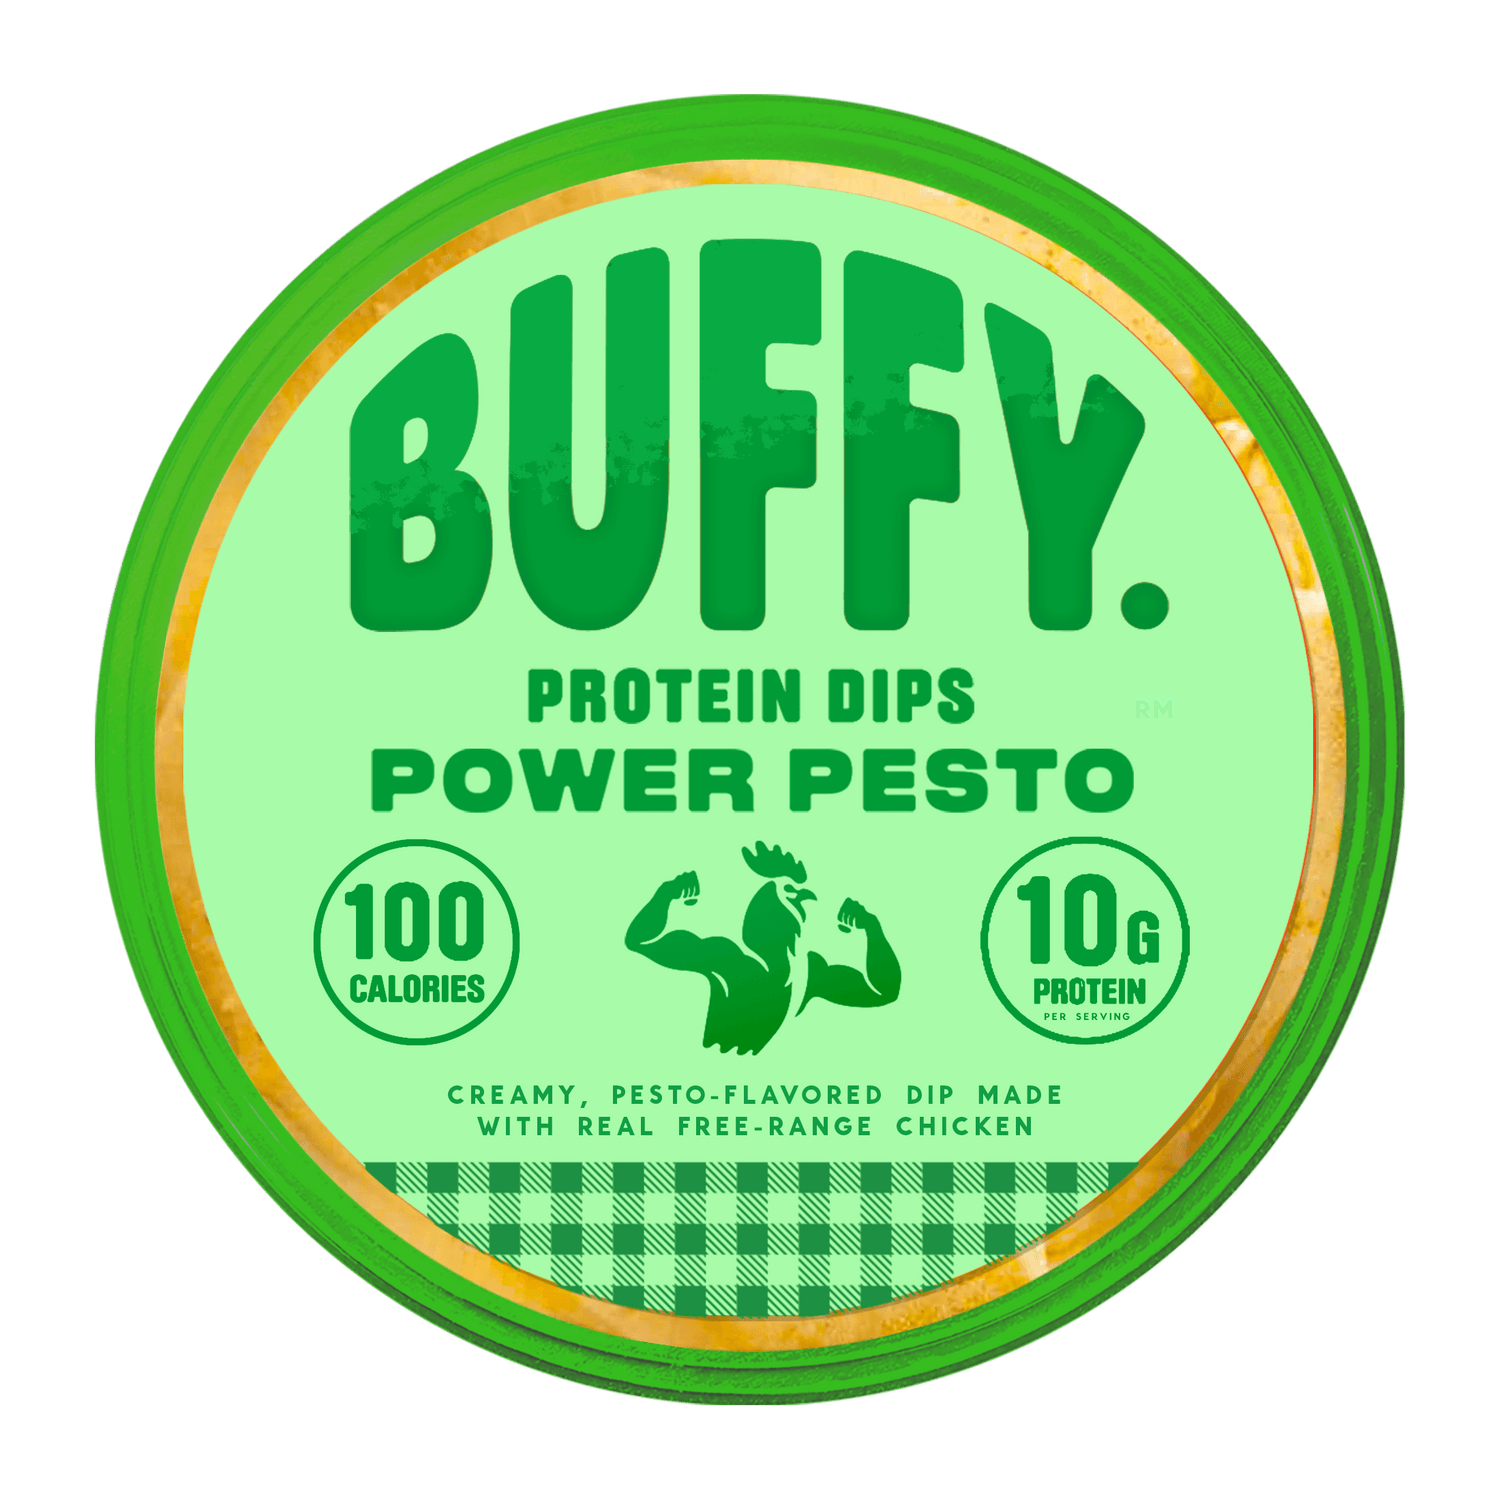 Buffy Protein Dips - Power Pesto - 100 Calories - 10G Protein per serving - Creamy, pesto-flavored dip made with real free-range chicken